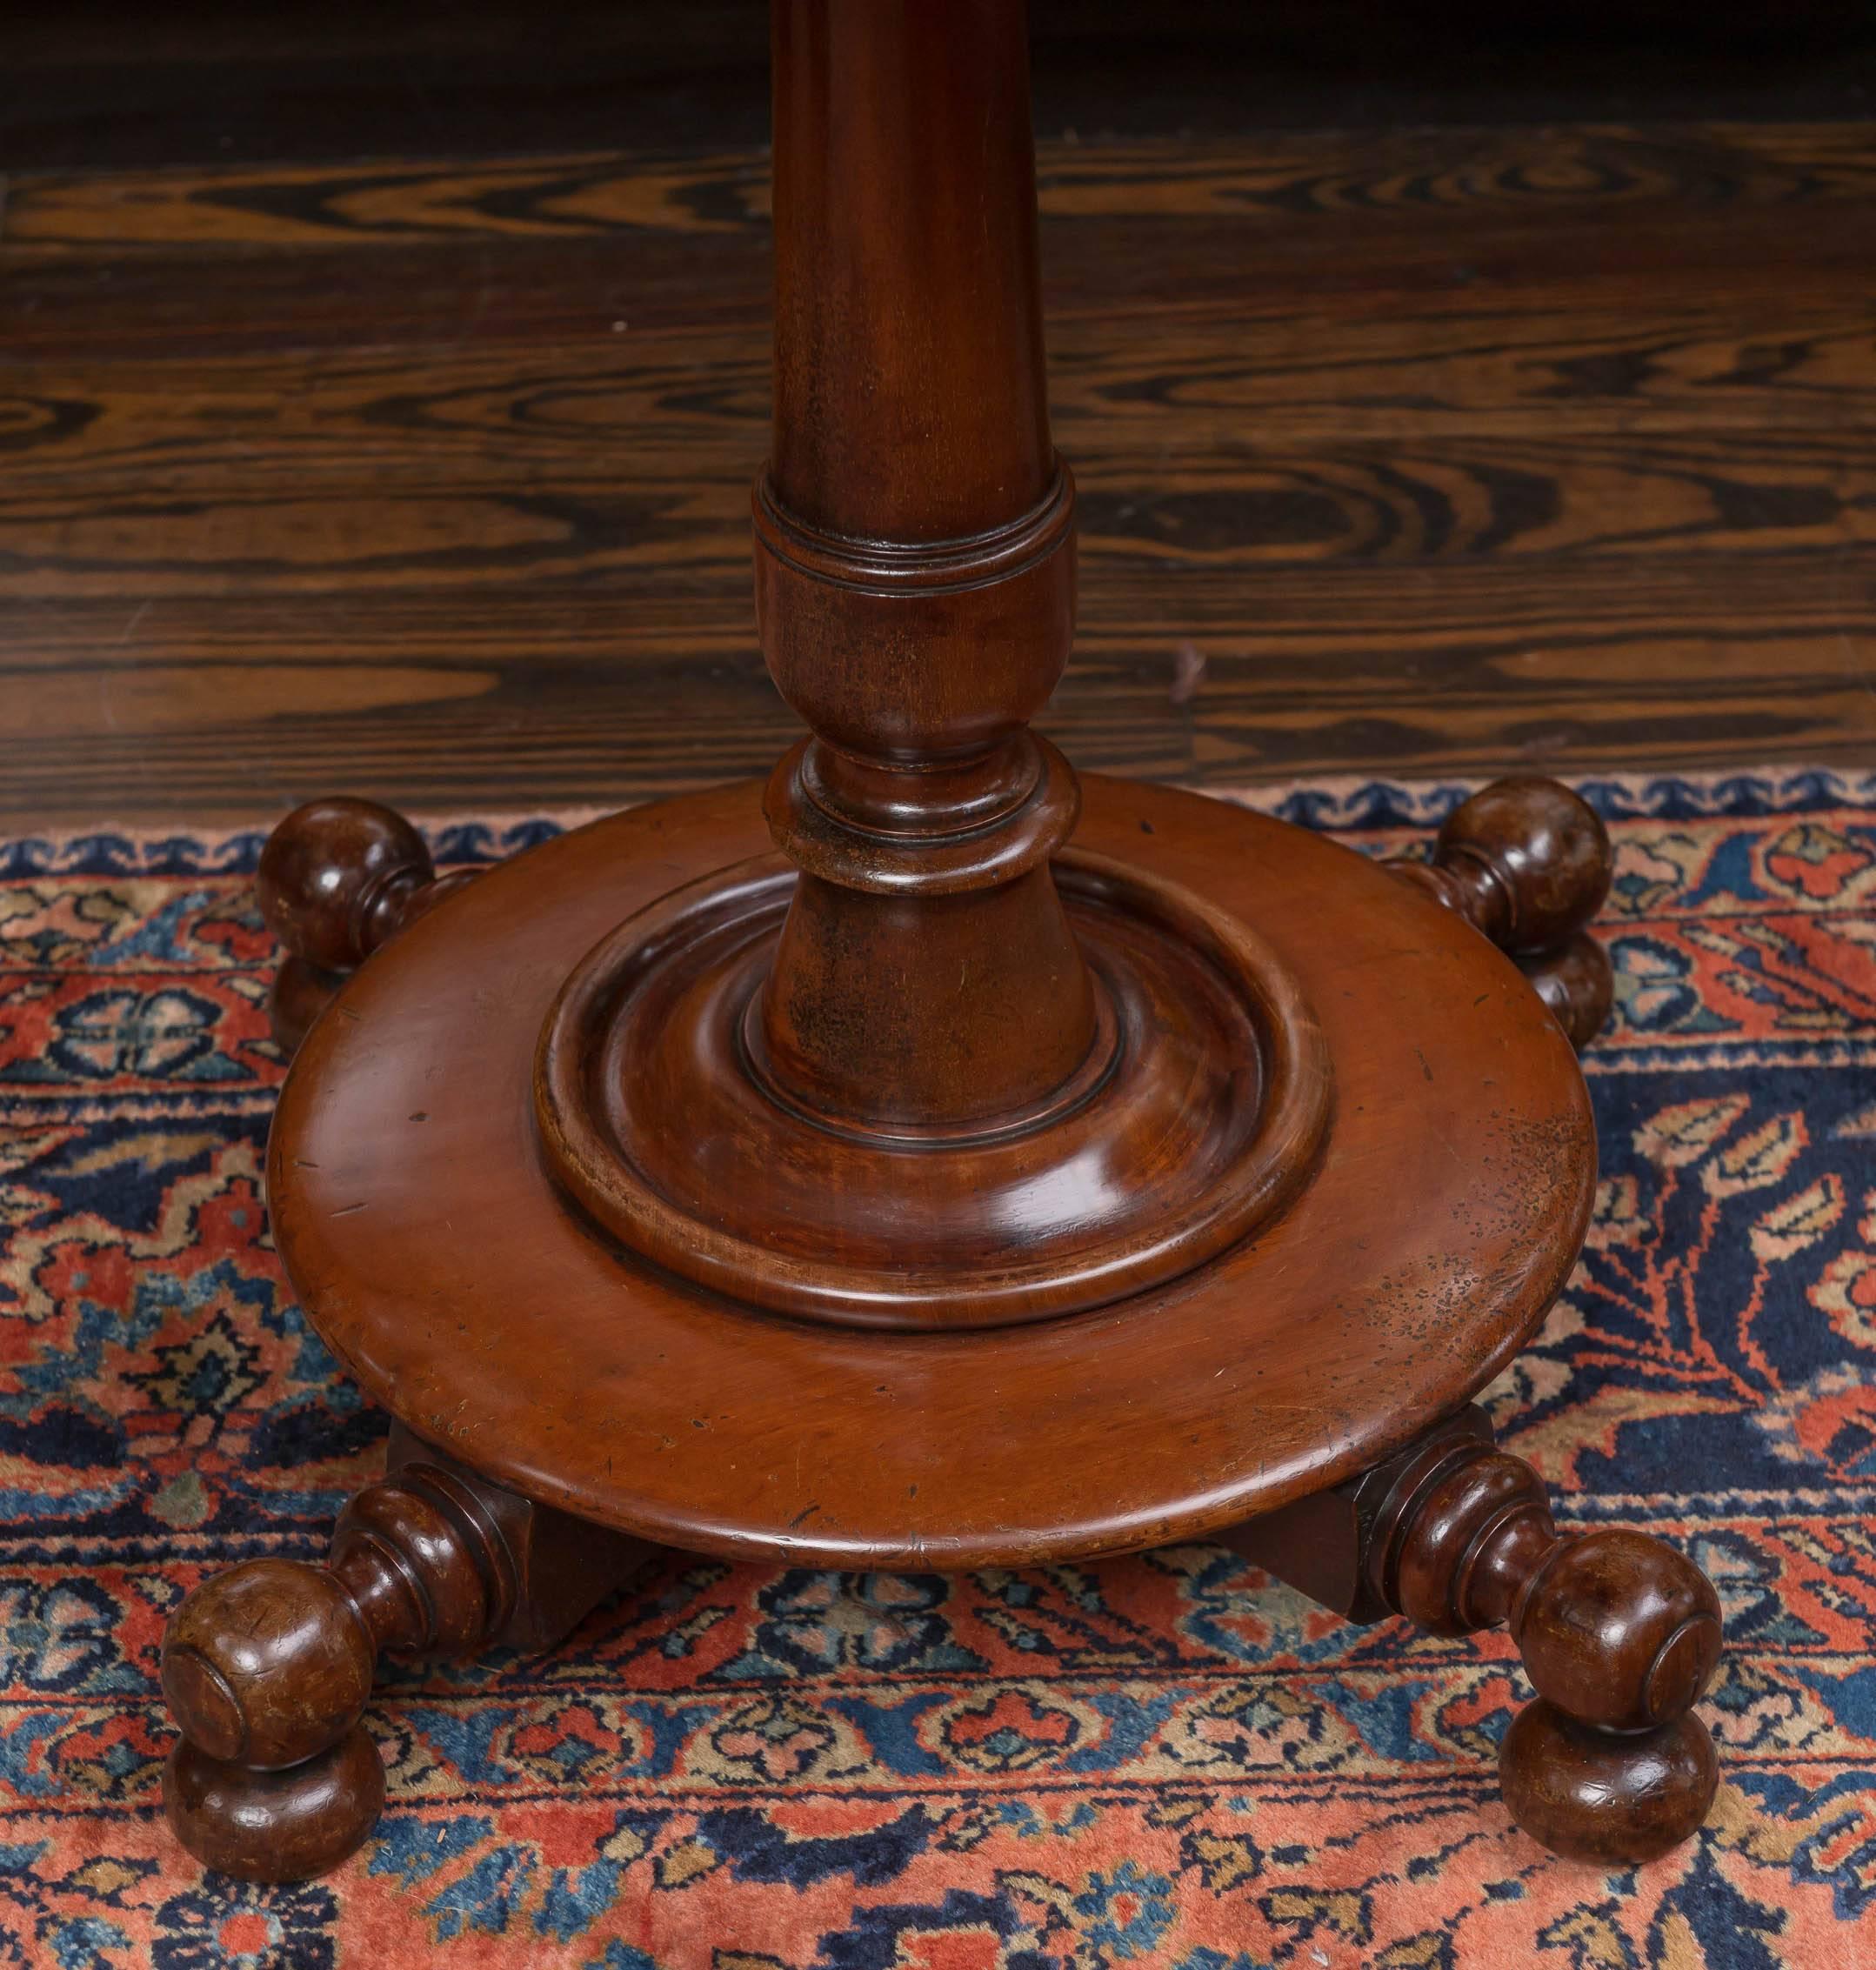 English mahogany George IV tilt-top table, circa 1835.
Good proportions, solid boards and an unusual circular plinth base with turned legs on ball feet. 
Overall mellow color and an old marked finish.